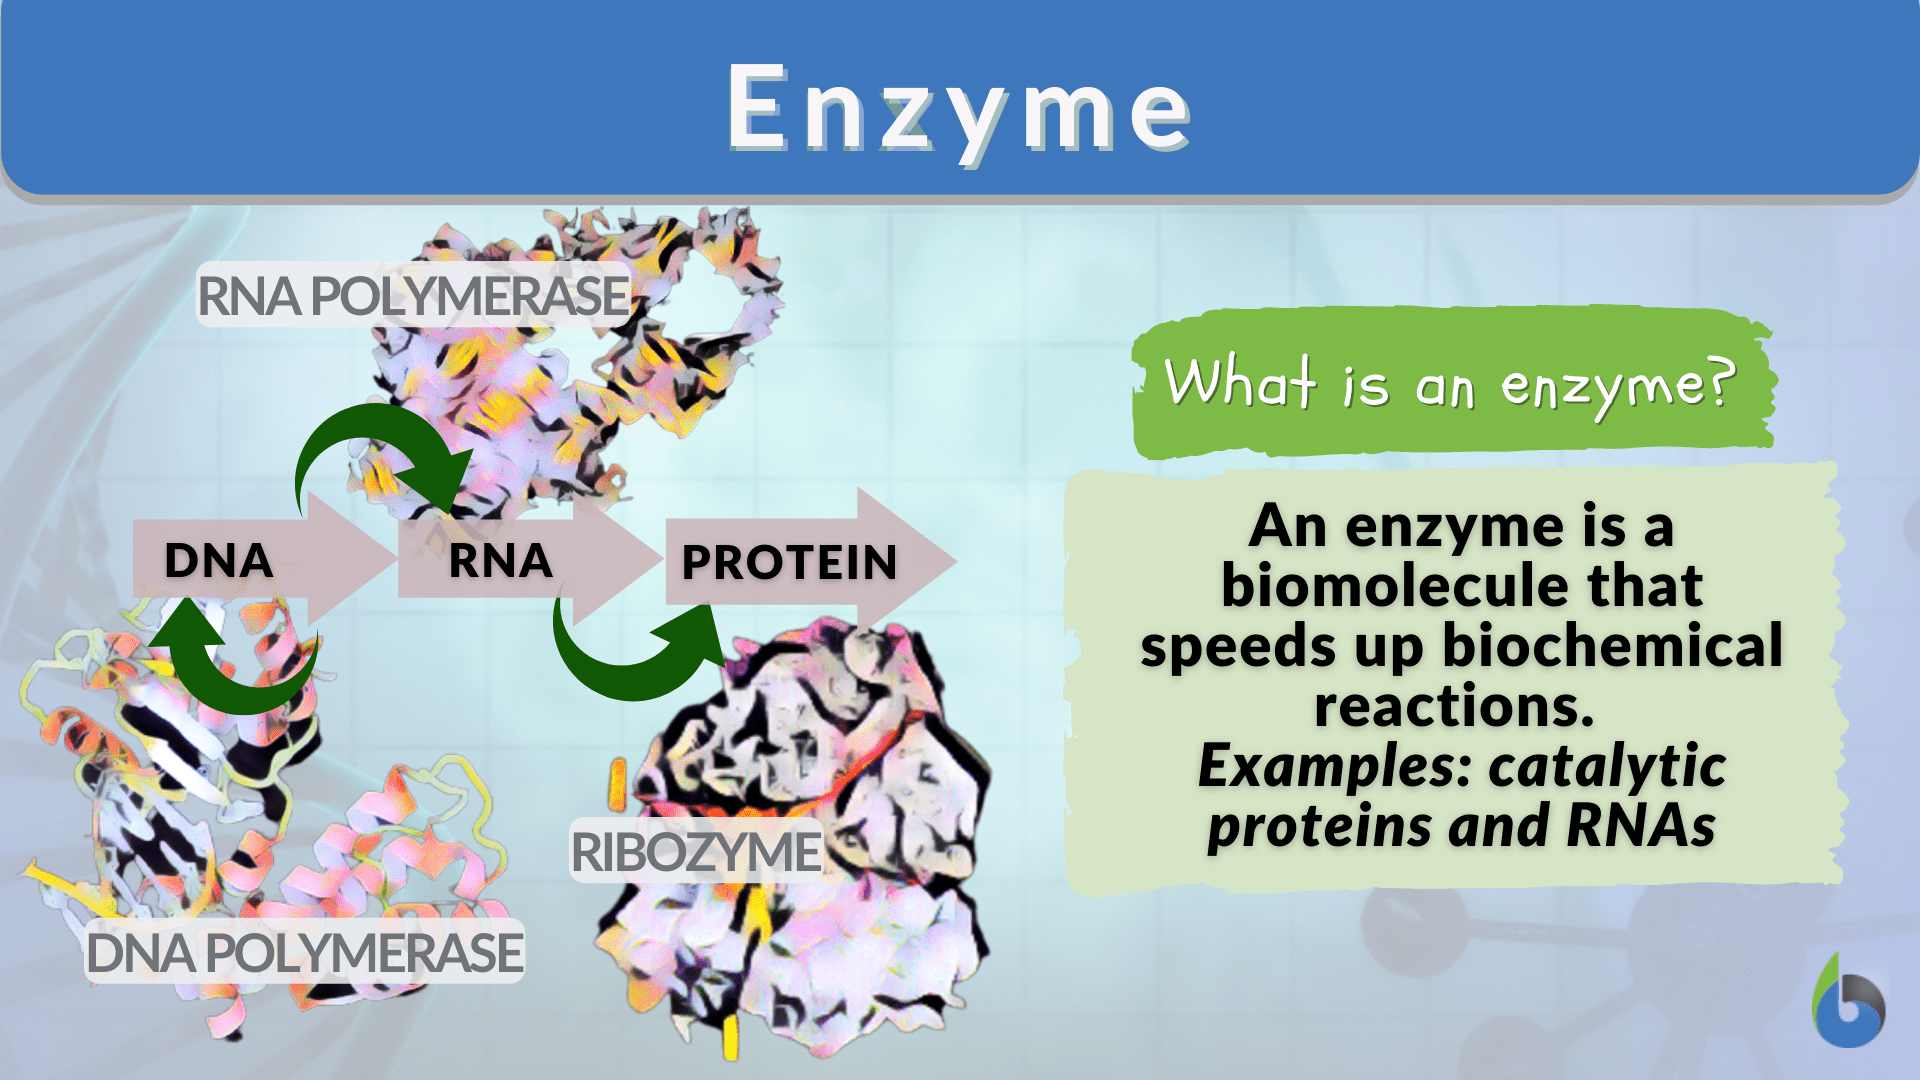 simple enzyme structure